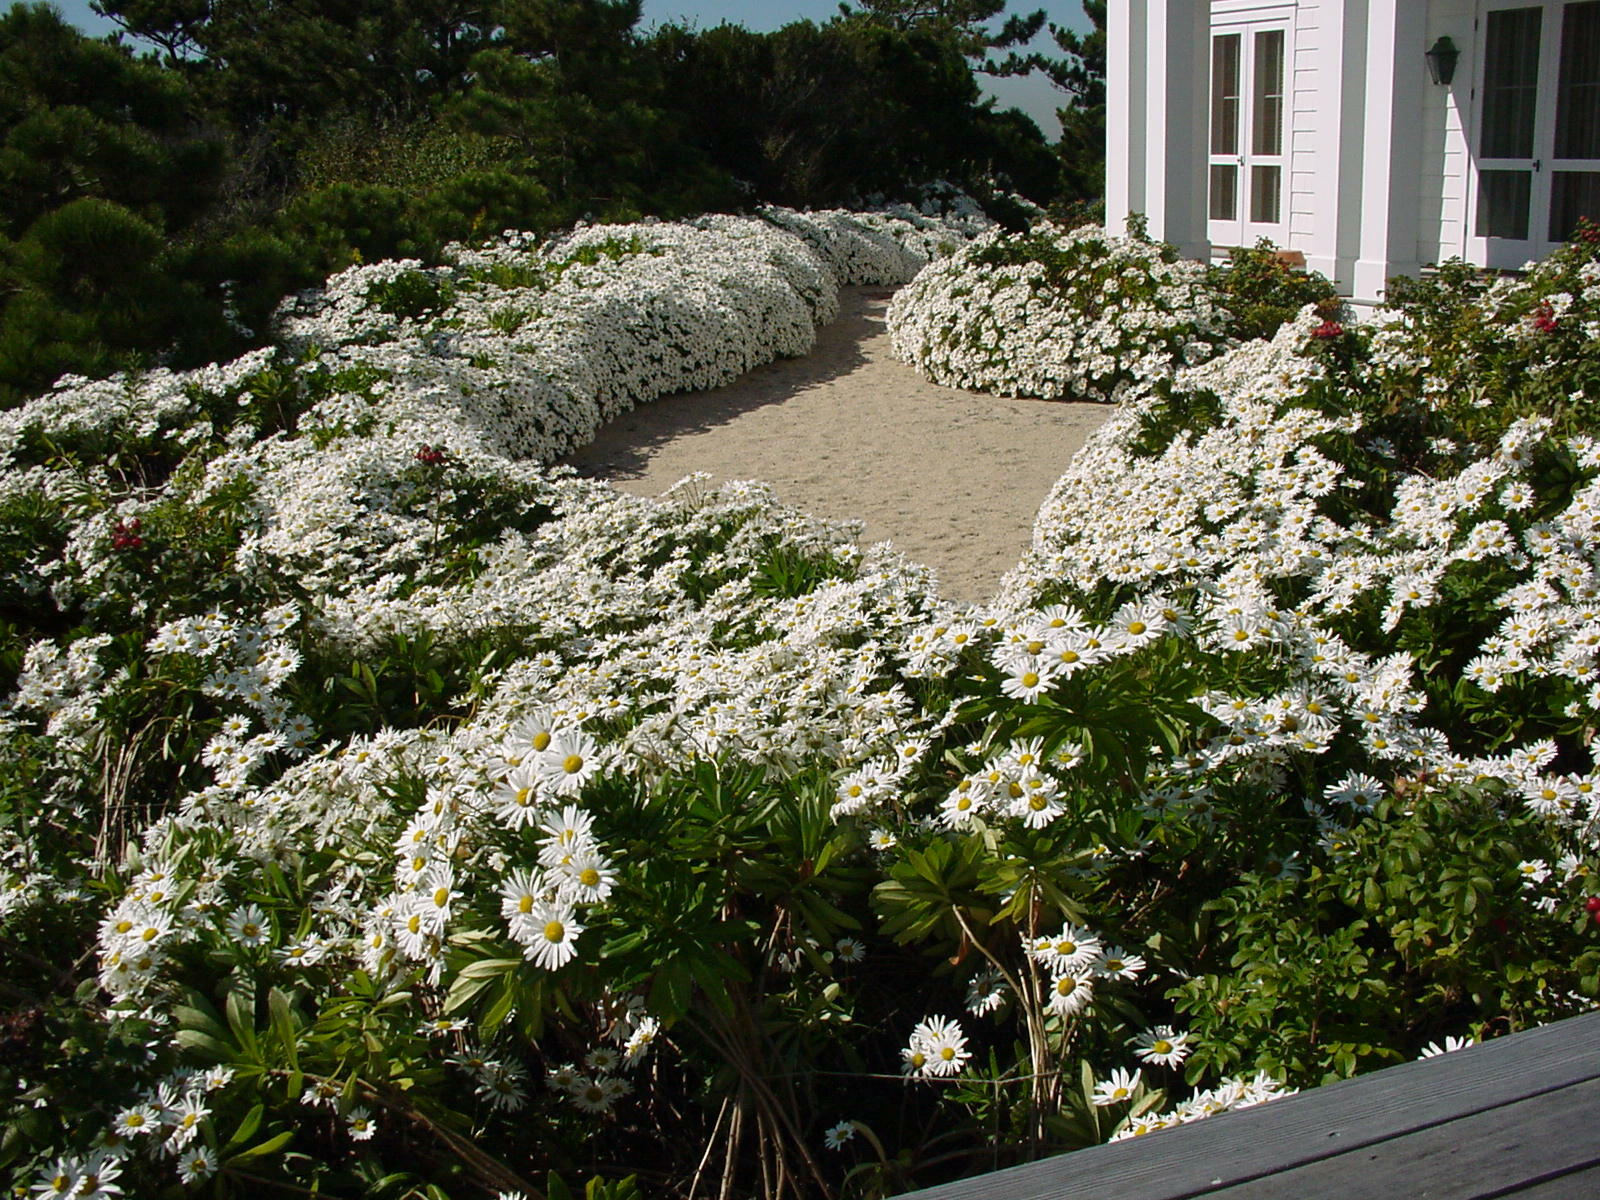 A mass planting of Montauk daisies on the ocean-facing side of a Southampton home.  Notice the plants are growing in pure beach sand and the plants are tight and not falling over in this mid-October shot.